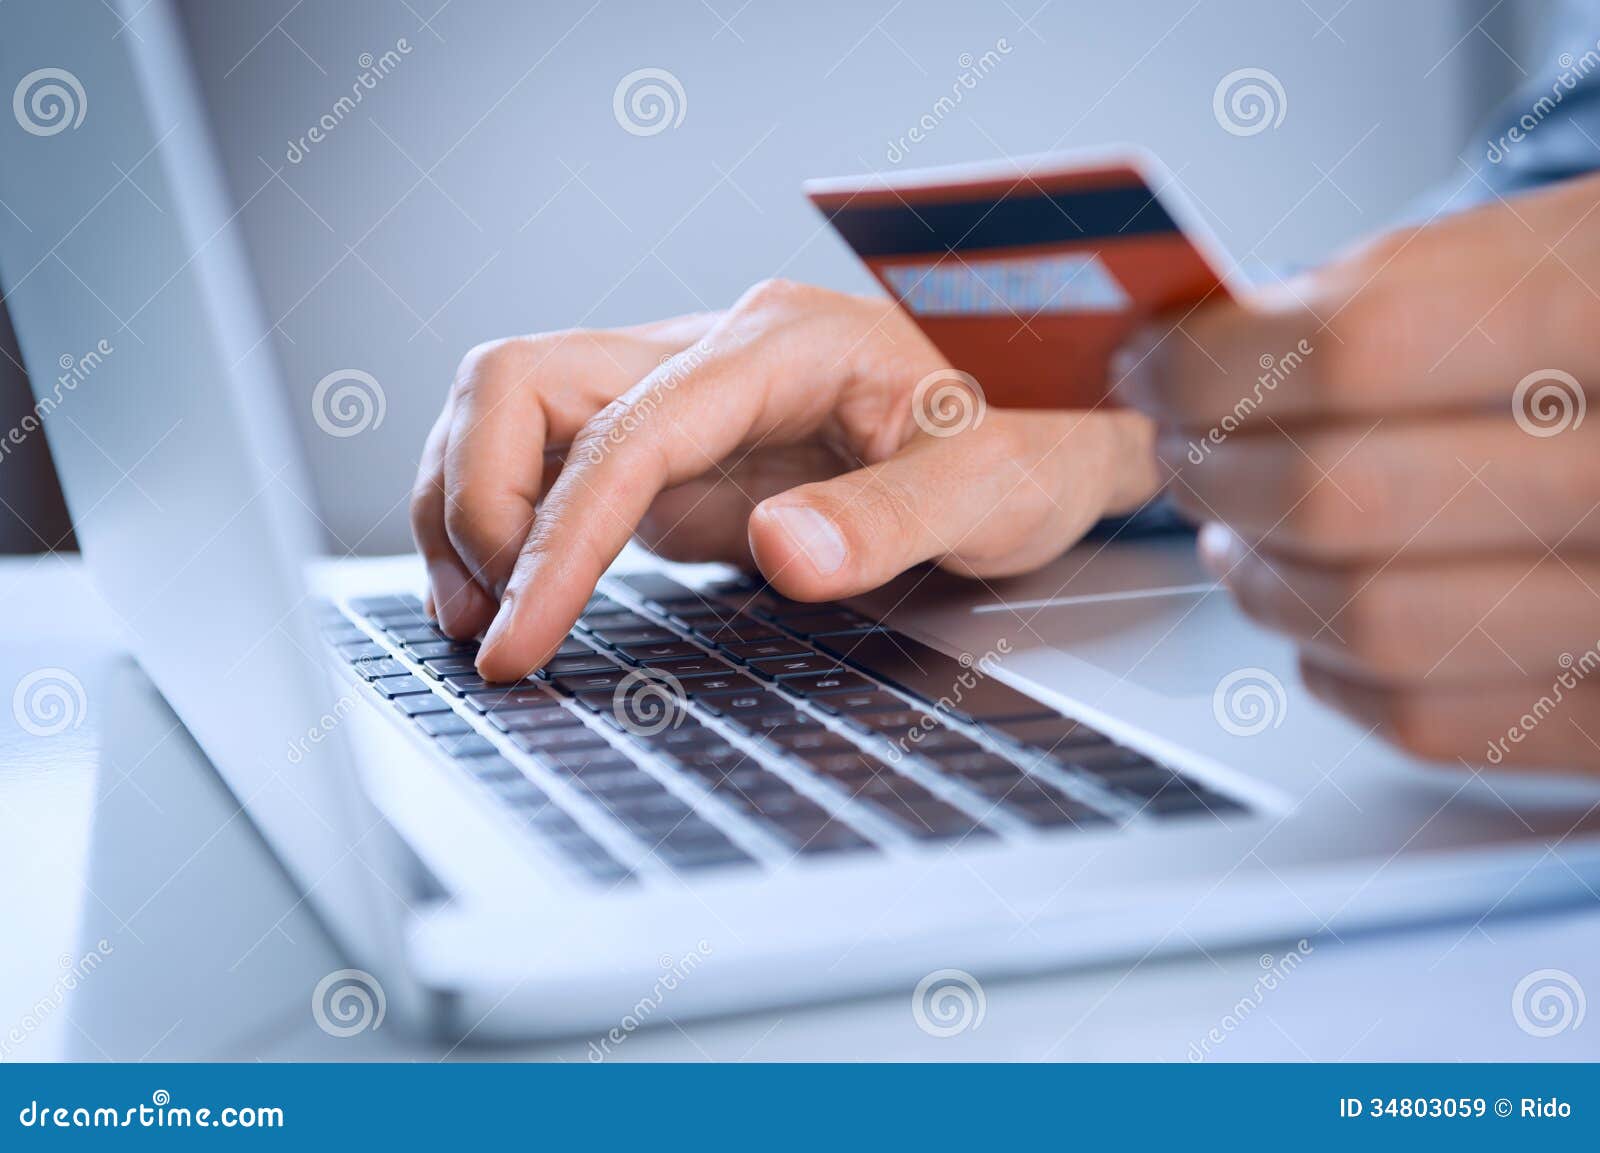 man payment online with credit card